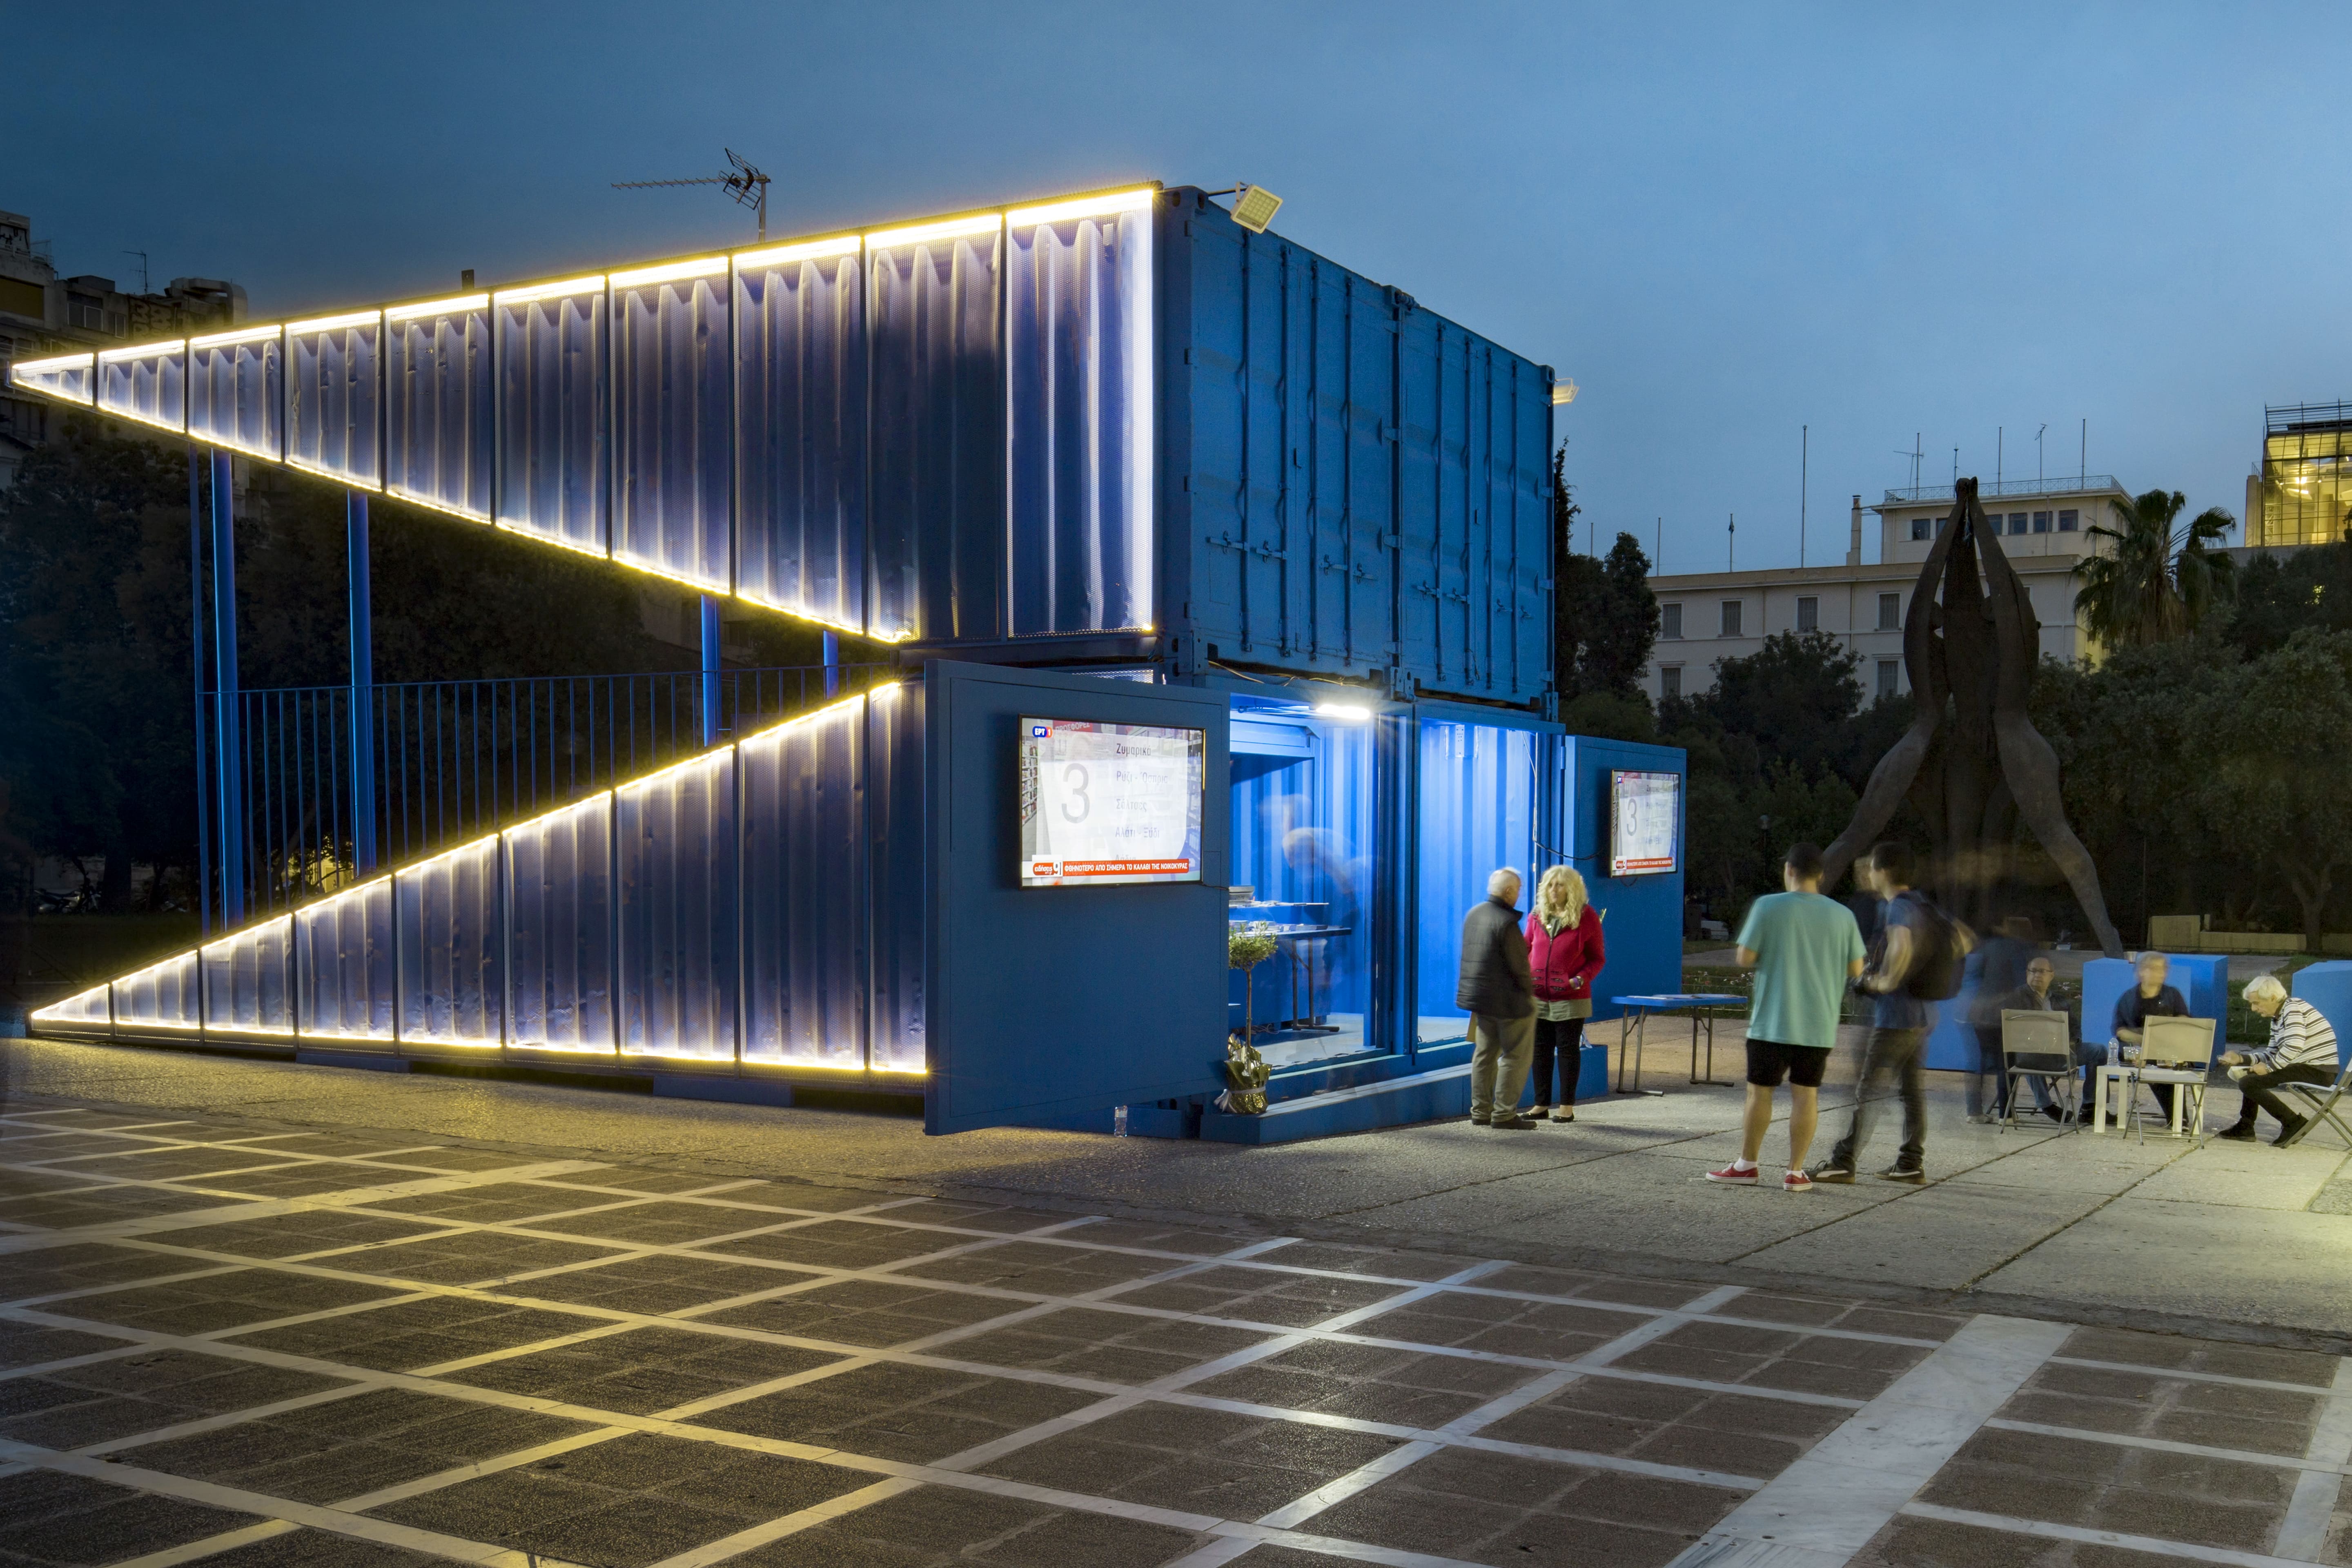 Mobile Podium structure built with two blue containers